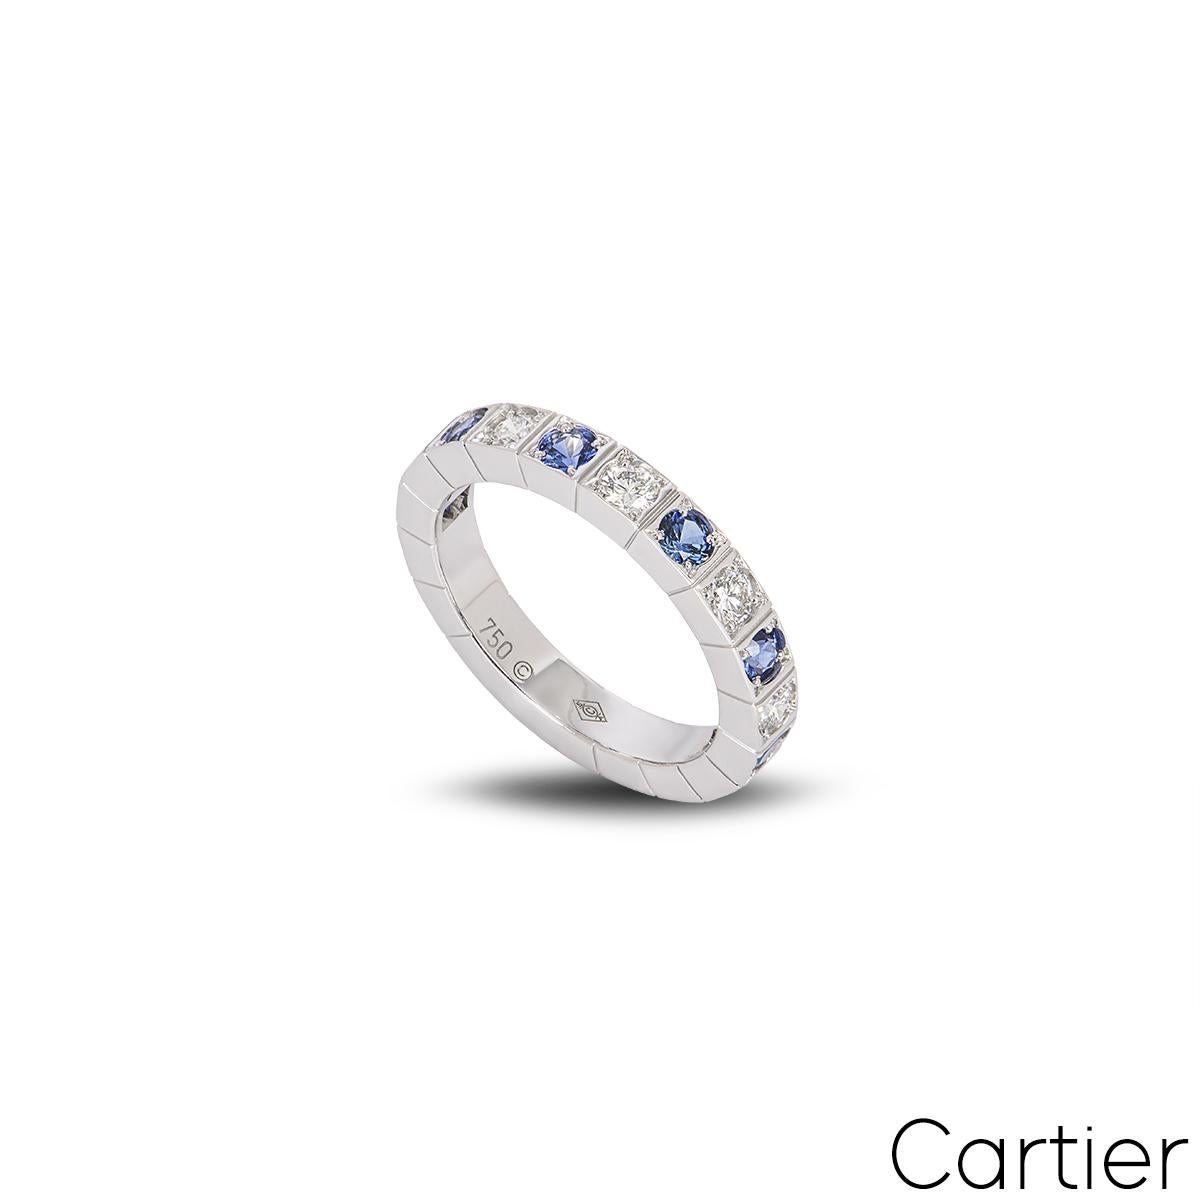 A timeless 18k white gold diamond and sapphire ring by Cartier from the Lanieres collection. The ring is claw set with 12 alternating round brilliant cut diamonds and sapphires, complemented by the iconic Lanieres design around the back and outer